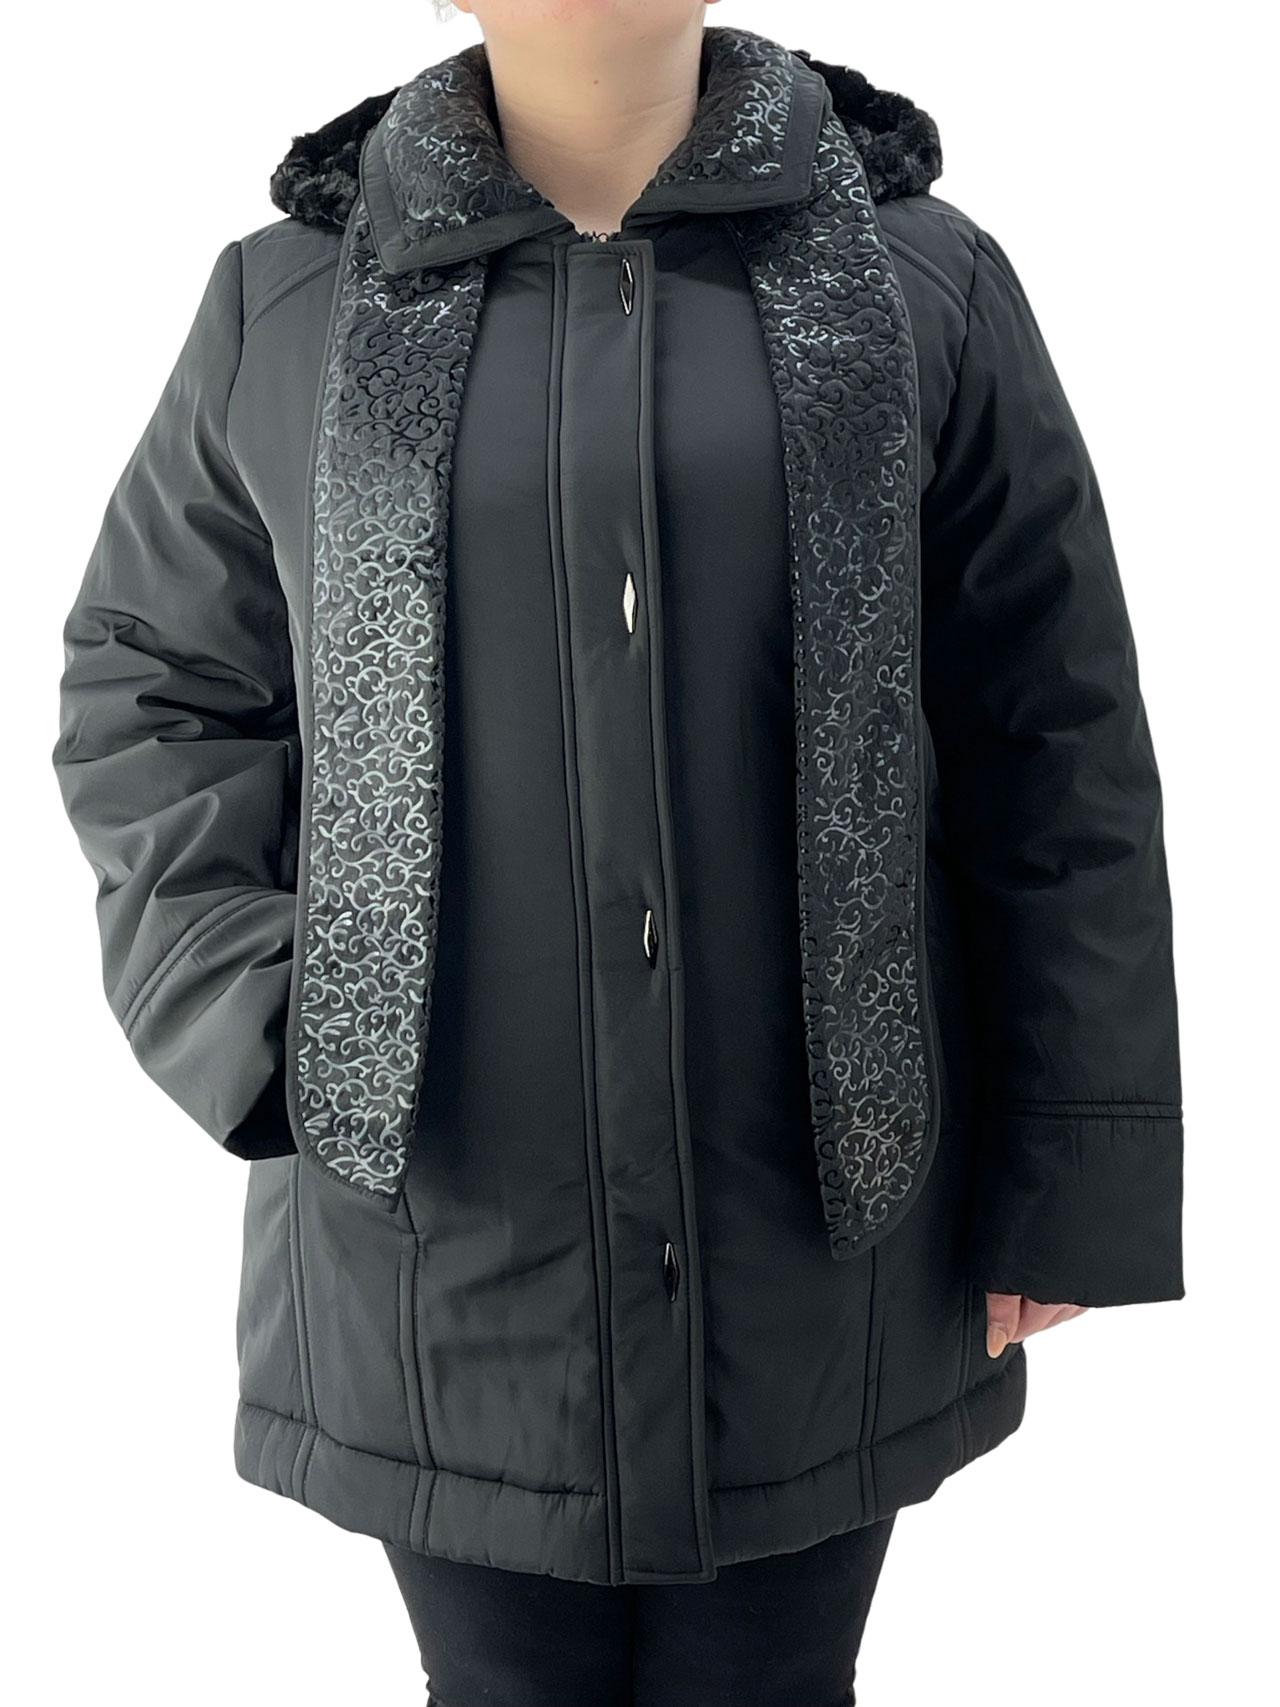 Women's jacket with scarf code GW134